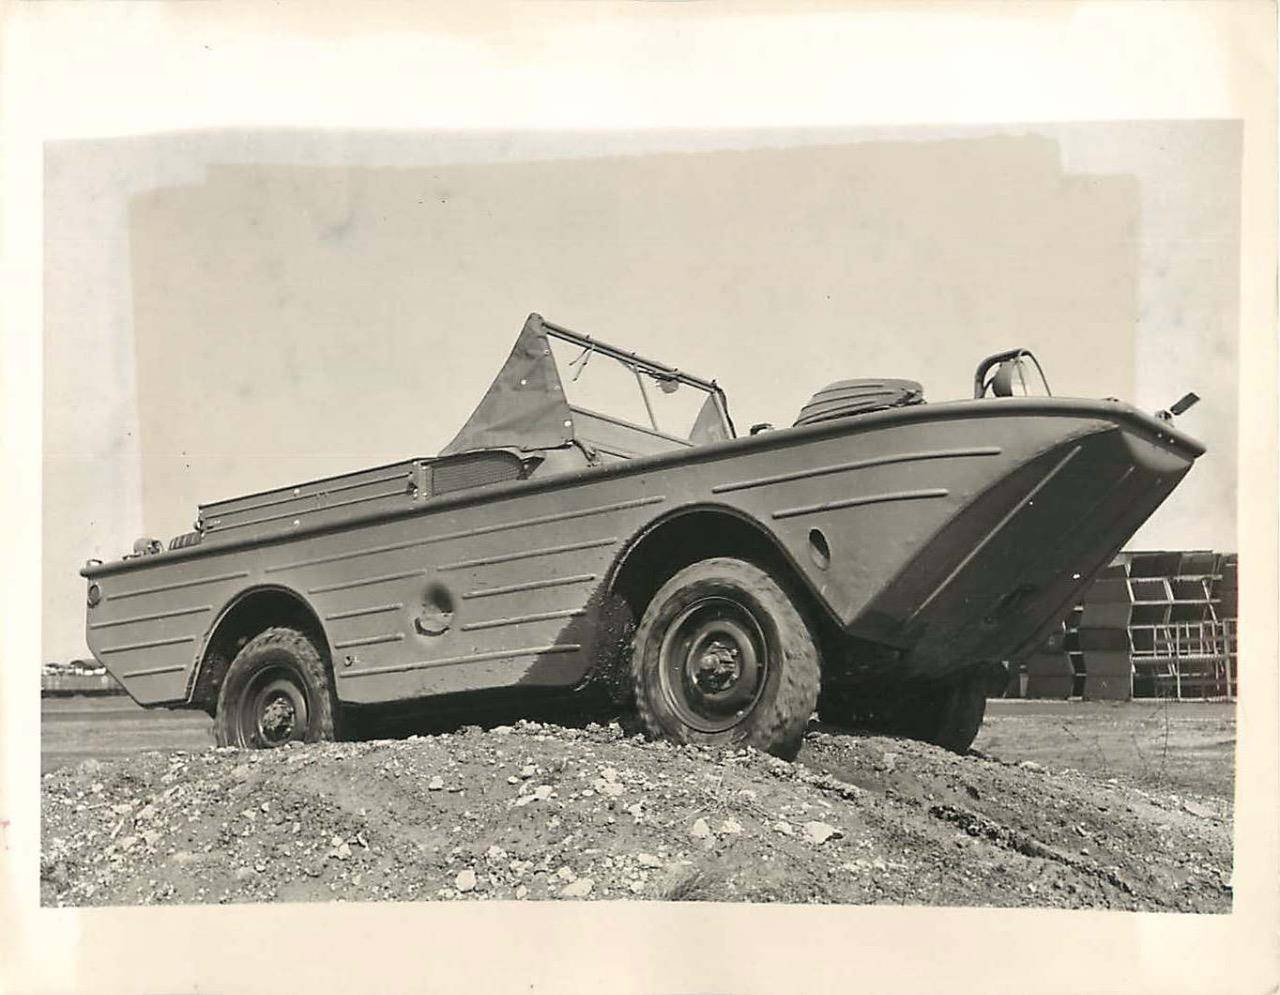 The ford gpa was an amphibious jeep designed in 1941